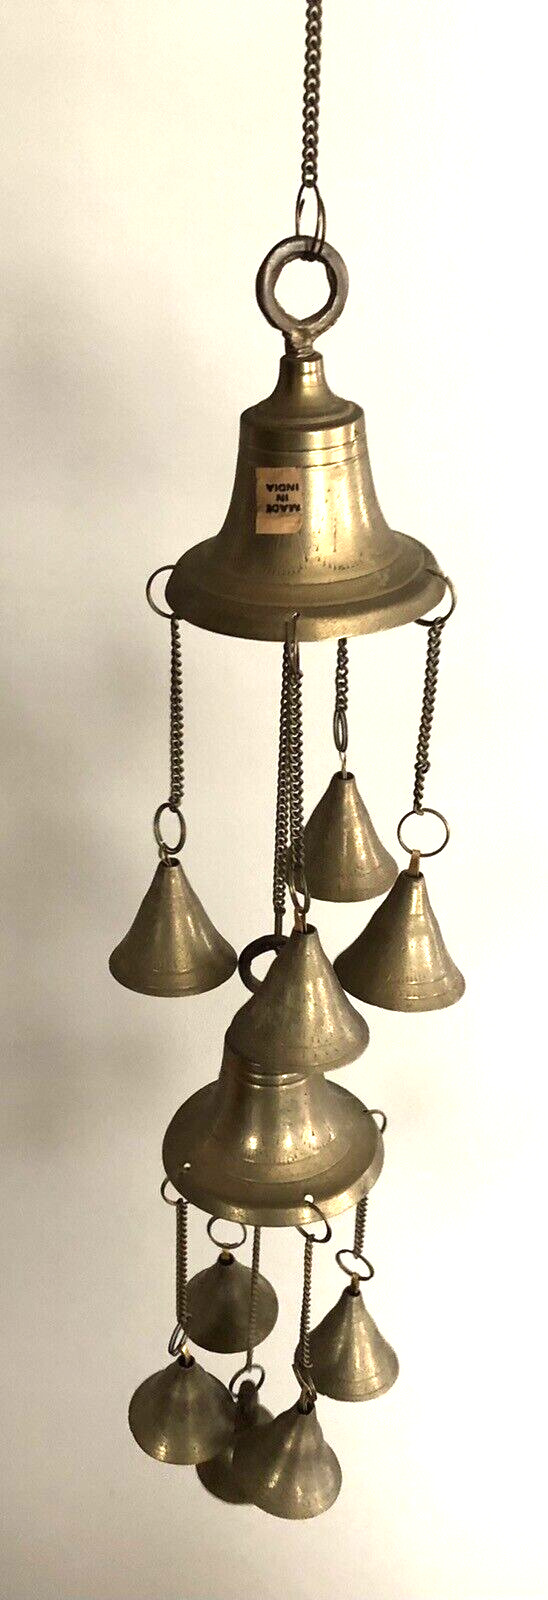 Scarce Vintage India Brass Bells Chimes Chandelier Style